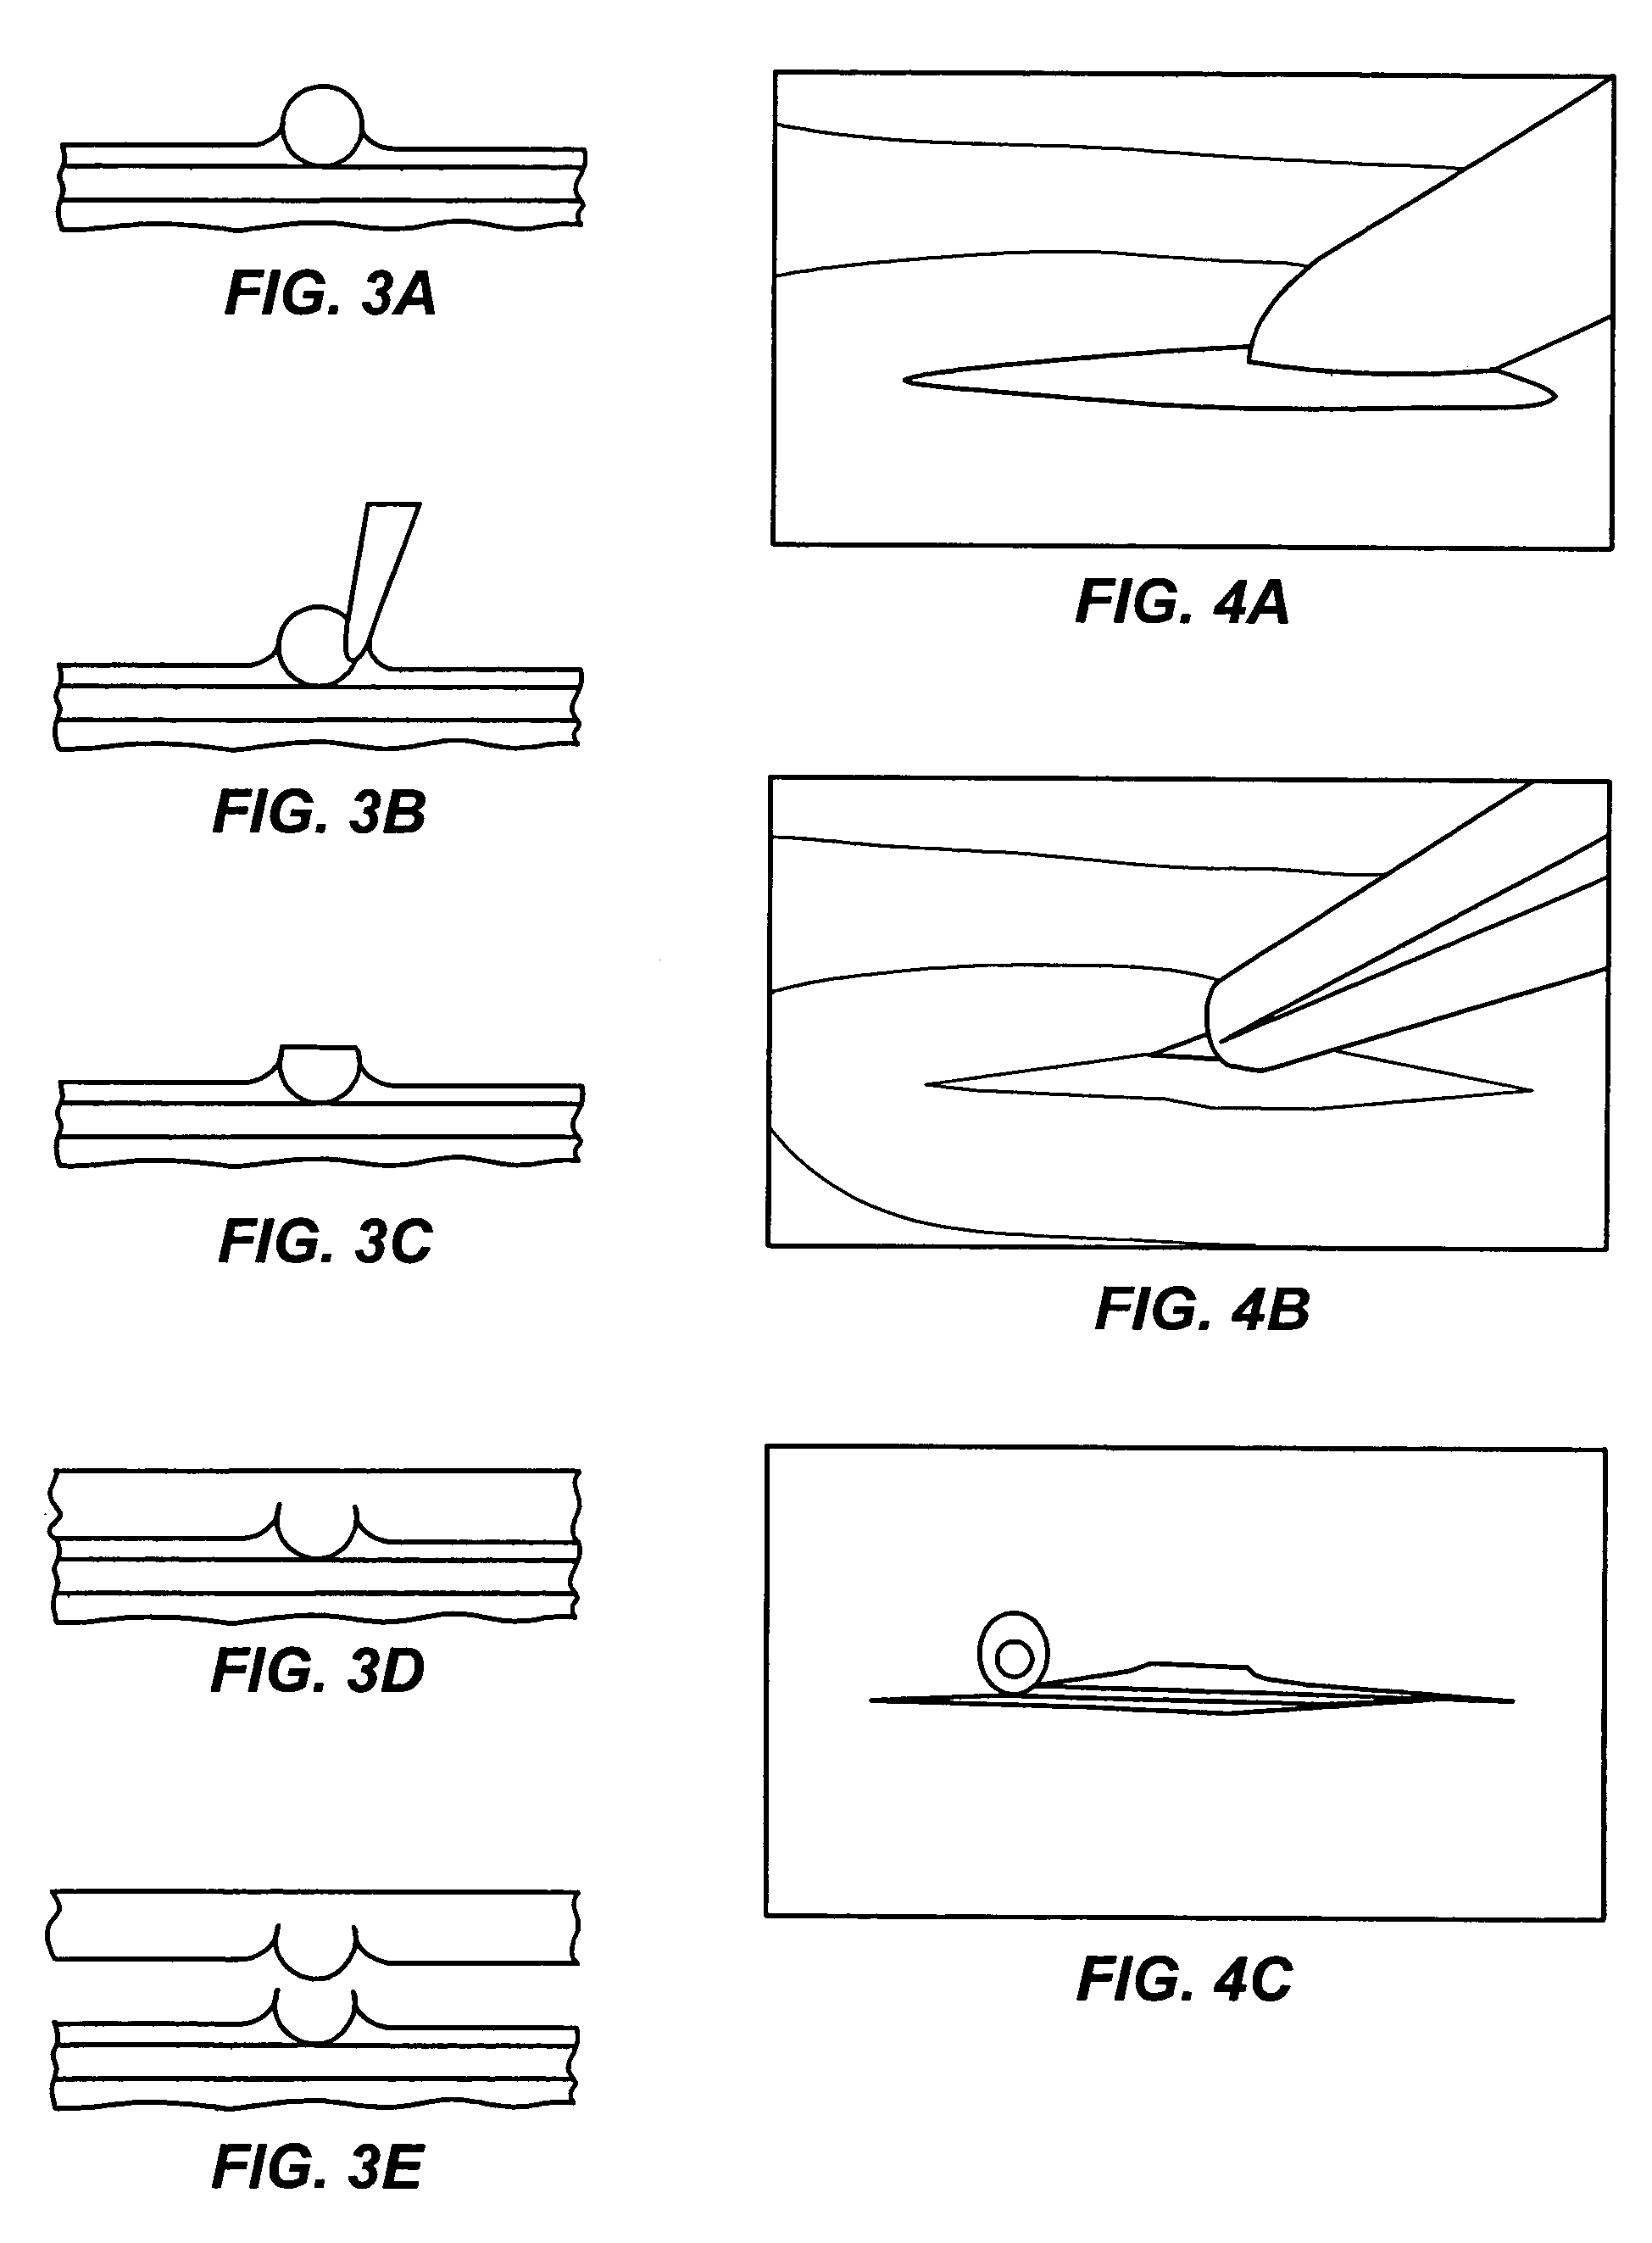 Microfabricated rubber microscope using soft solid immersion lenses